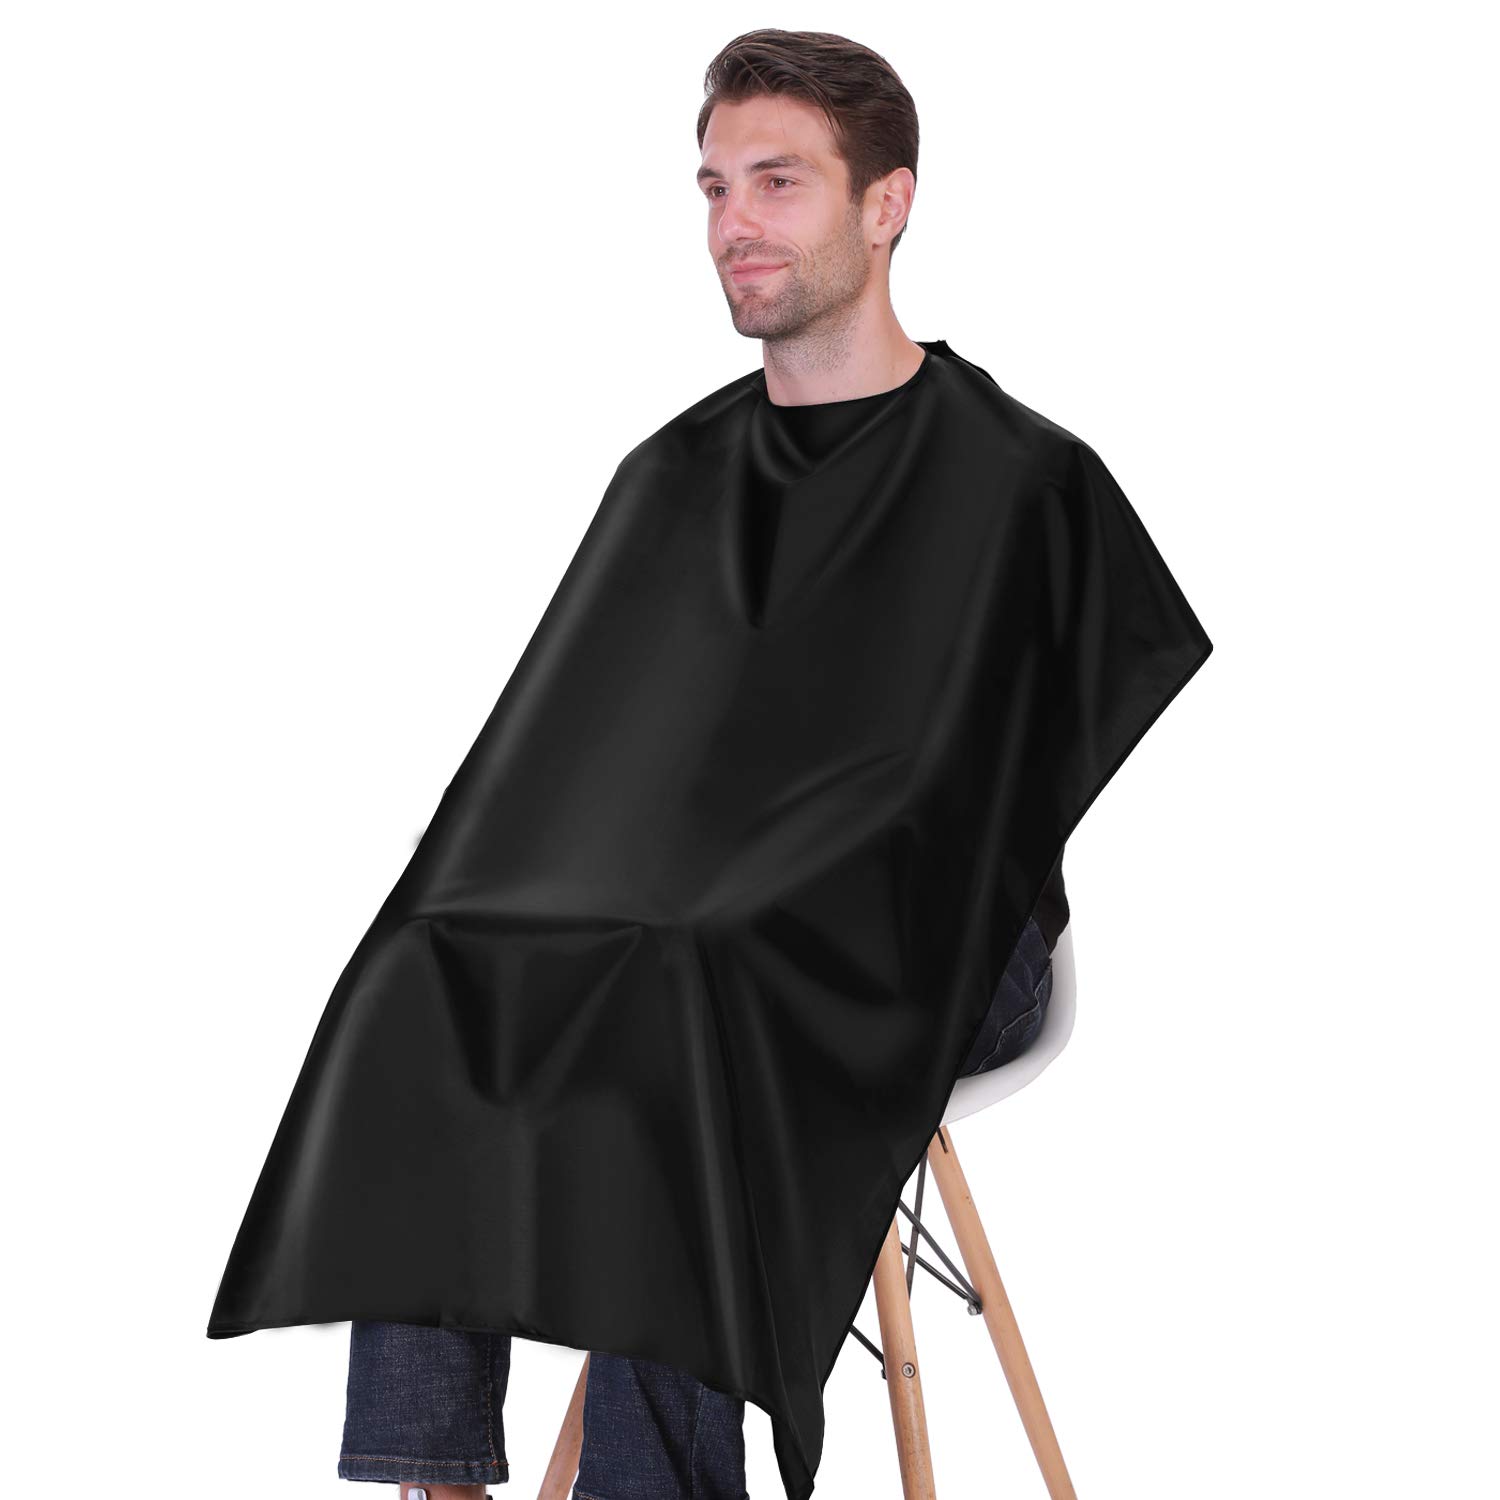 NOOA Waterproof Barber Cape - Haircut Cape for Men, Unisex Black Hair Cutting Cape with Adjustable Neck Size, 41.5 x 58 inches Hairdresser Cape for Hair Treatment - Cutting/Coloring/Perming